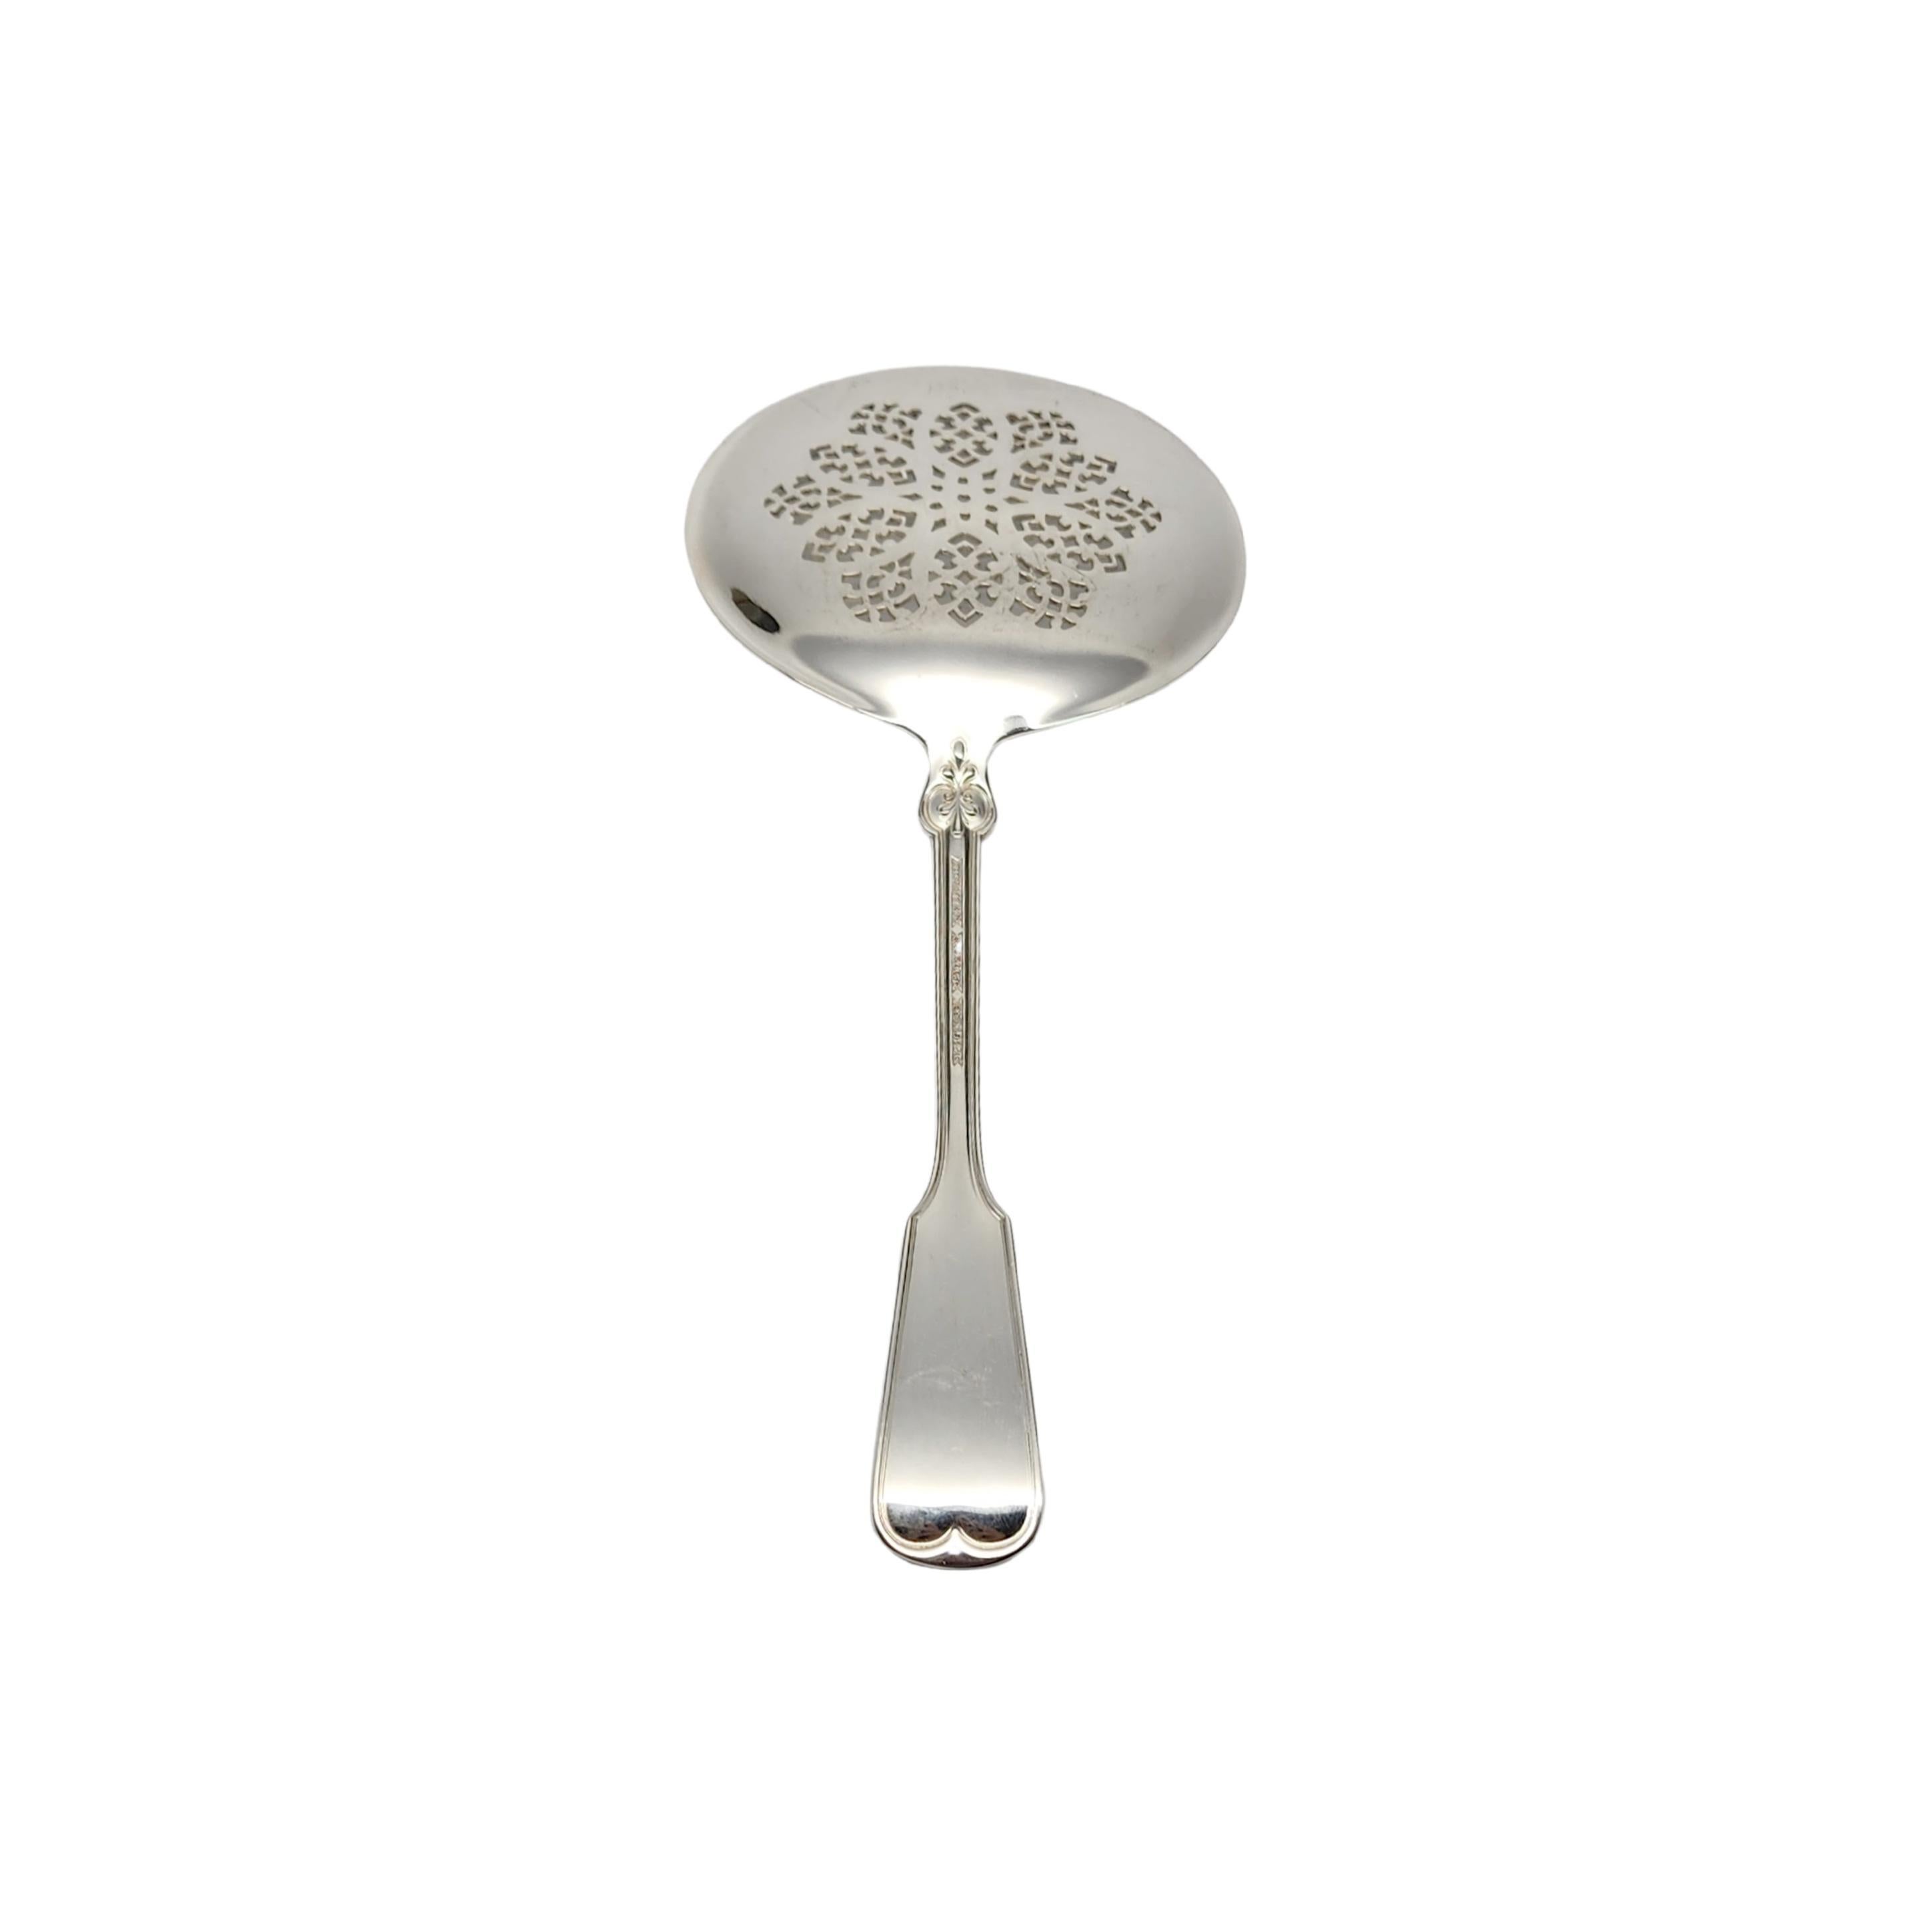 Sterling silver tomato server in the Shell & Thread pattern by Tiffany & Co with monogram.

Monogram appears to be C

The Shell & Thread pattern was introduced in 1905, and continues to be one of the most in-demand of Tiffany's classic patterns. The